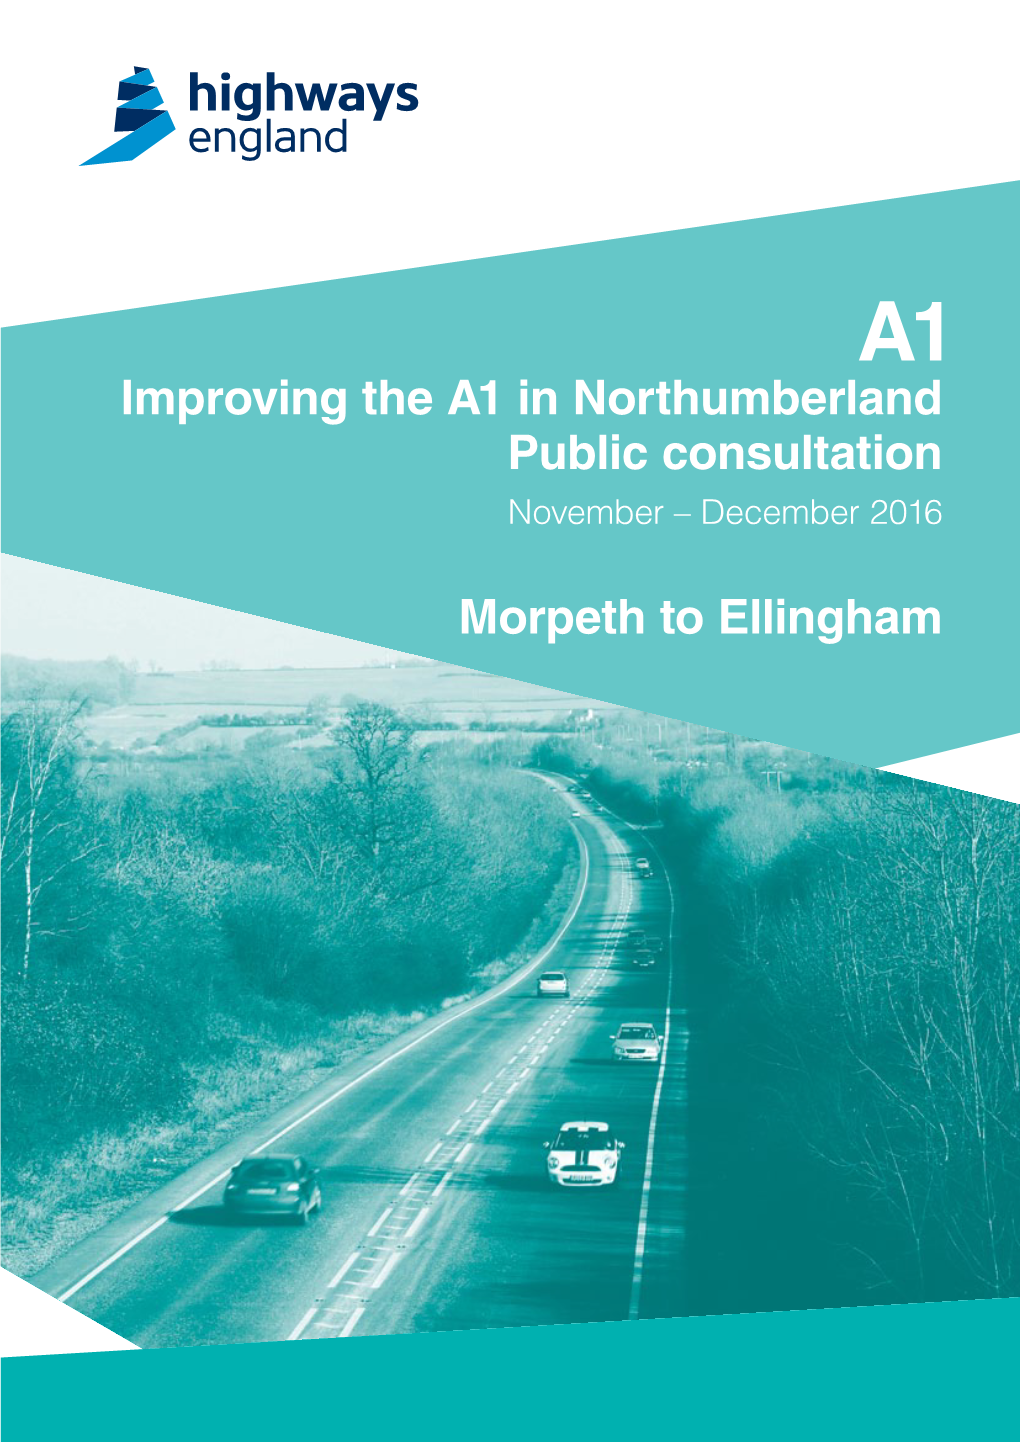 A1 Morpeth to Ellingham to Take Forward to the Next Stage of Design